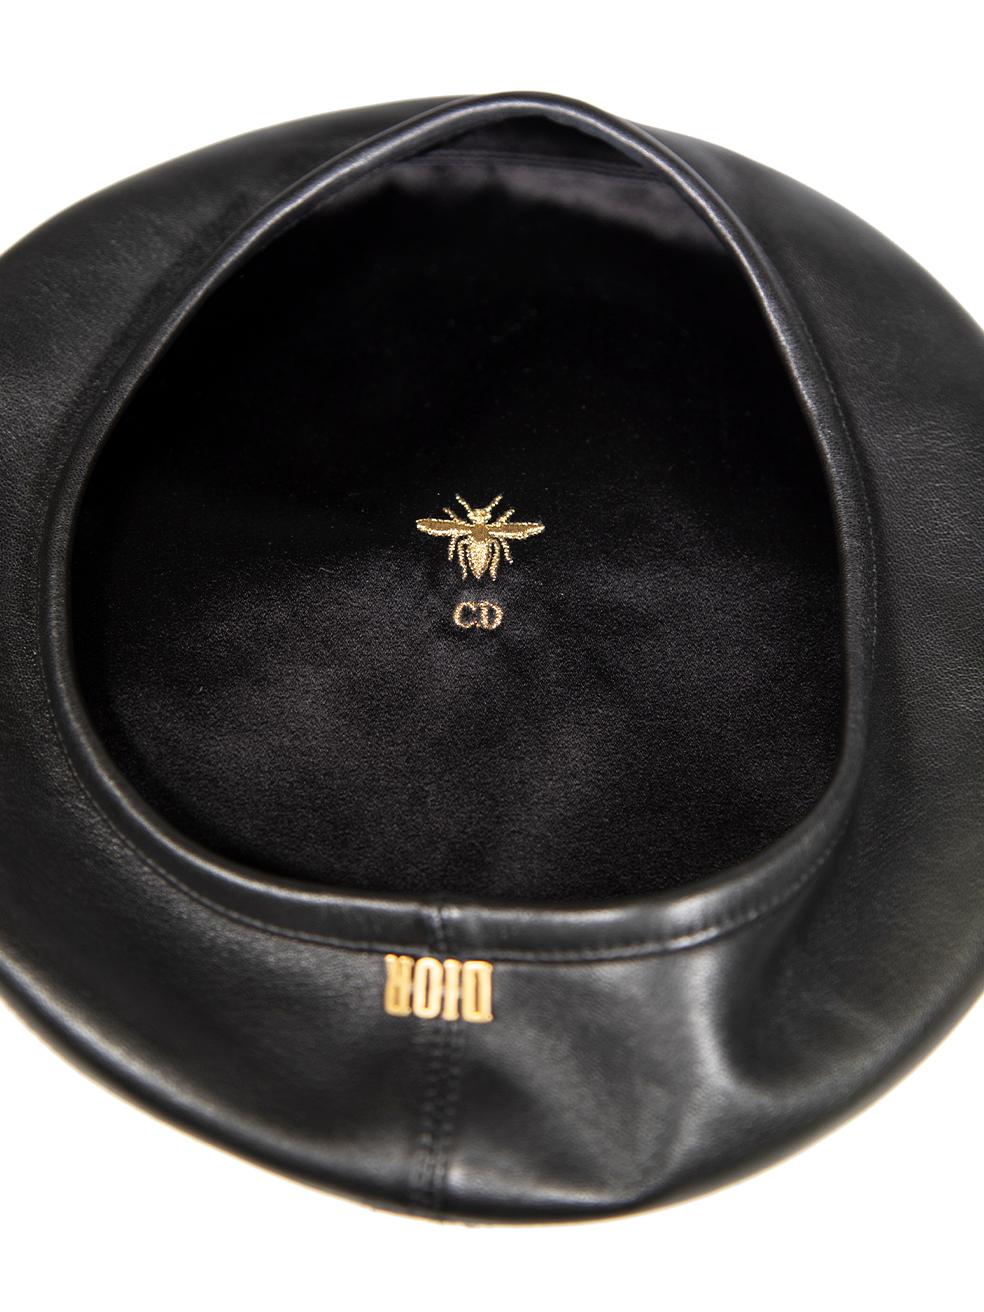 CONDITION is Very good. Hardly any visible wear to hat is evident on this used Dior designer resale item.
 
 
 
 Details
 
 
 D-Dream
 
 Black
 
 Leather
 
 Beret hat
 
 Buckle logo detail
 
 Internal embroidered logo
 
 
 
 
 
 Made in France
 
 
